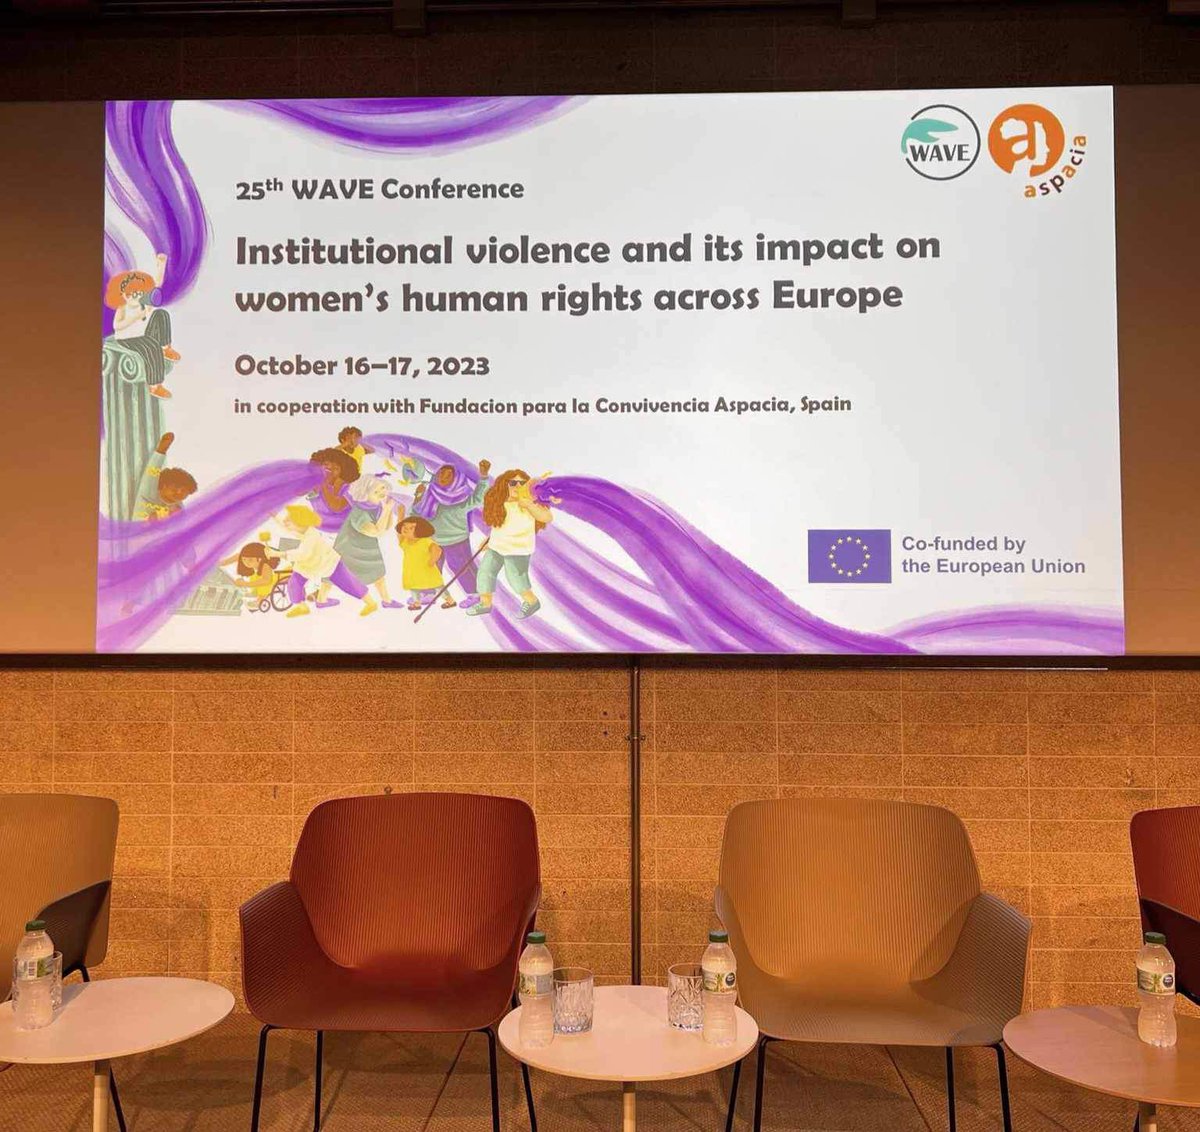 🗓️Sexual Assault Crisis Center’s president Tatevik Aghabekyan is participating in the 25th WAVE Conference in Madrid on Institutional violence and its impact on women's human rights across Europe. ✔️Previously on October 3rd Tatevik has been chosen as a WAVE board member.